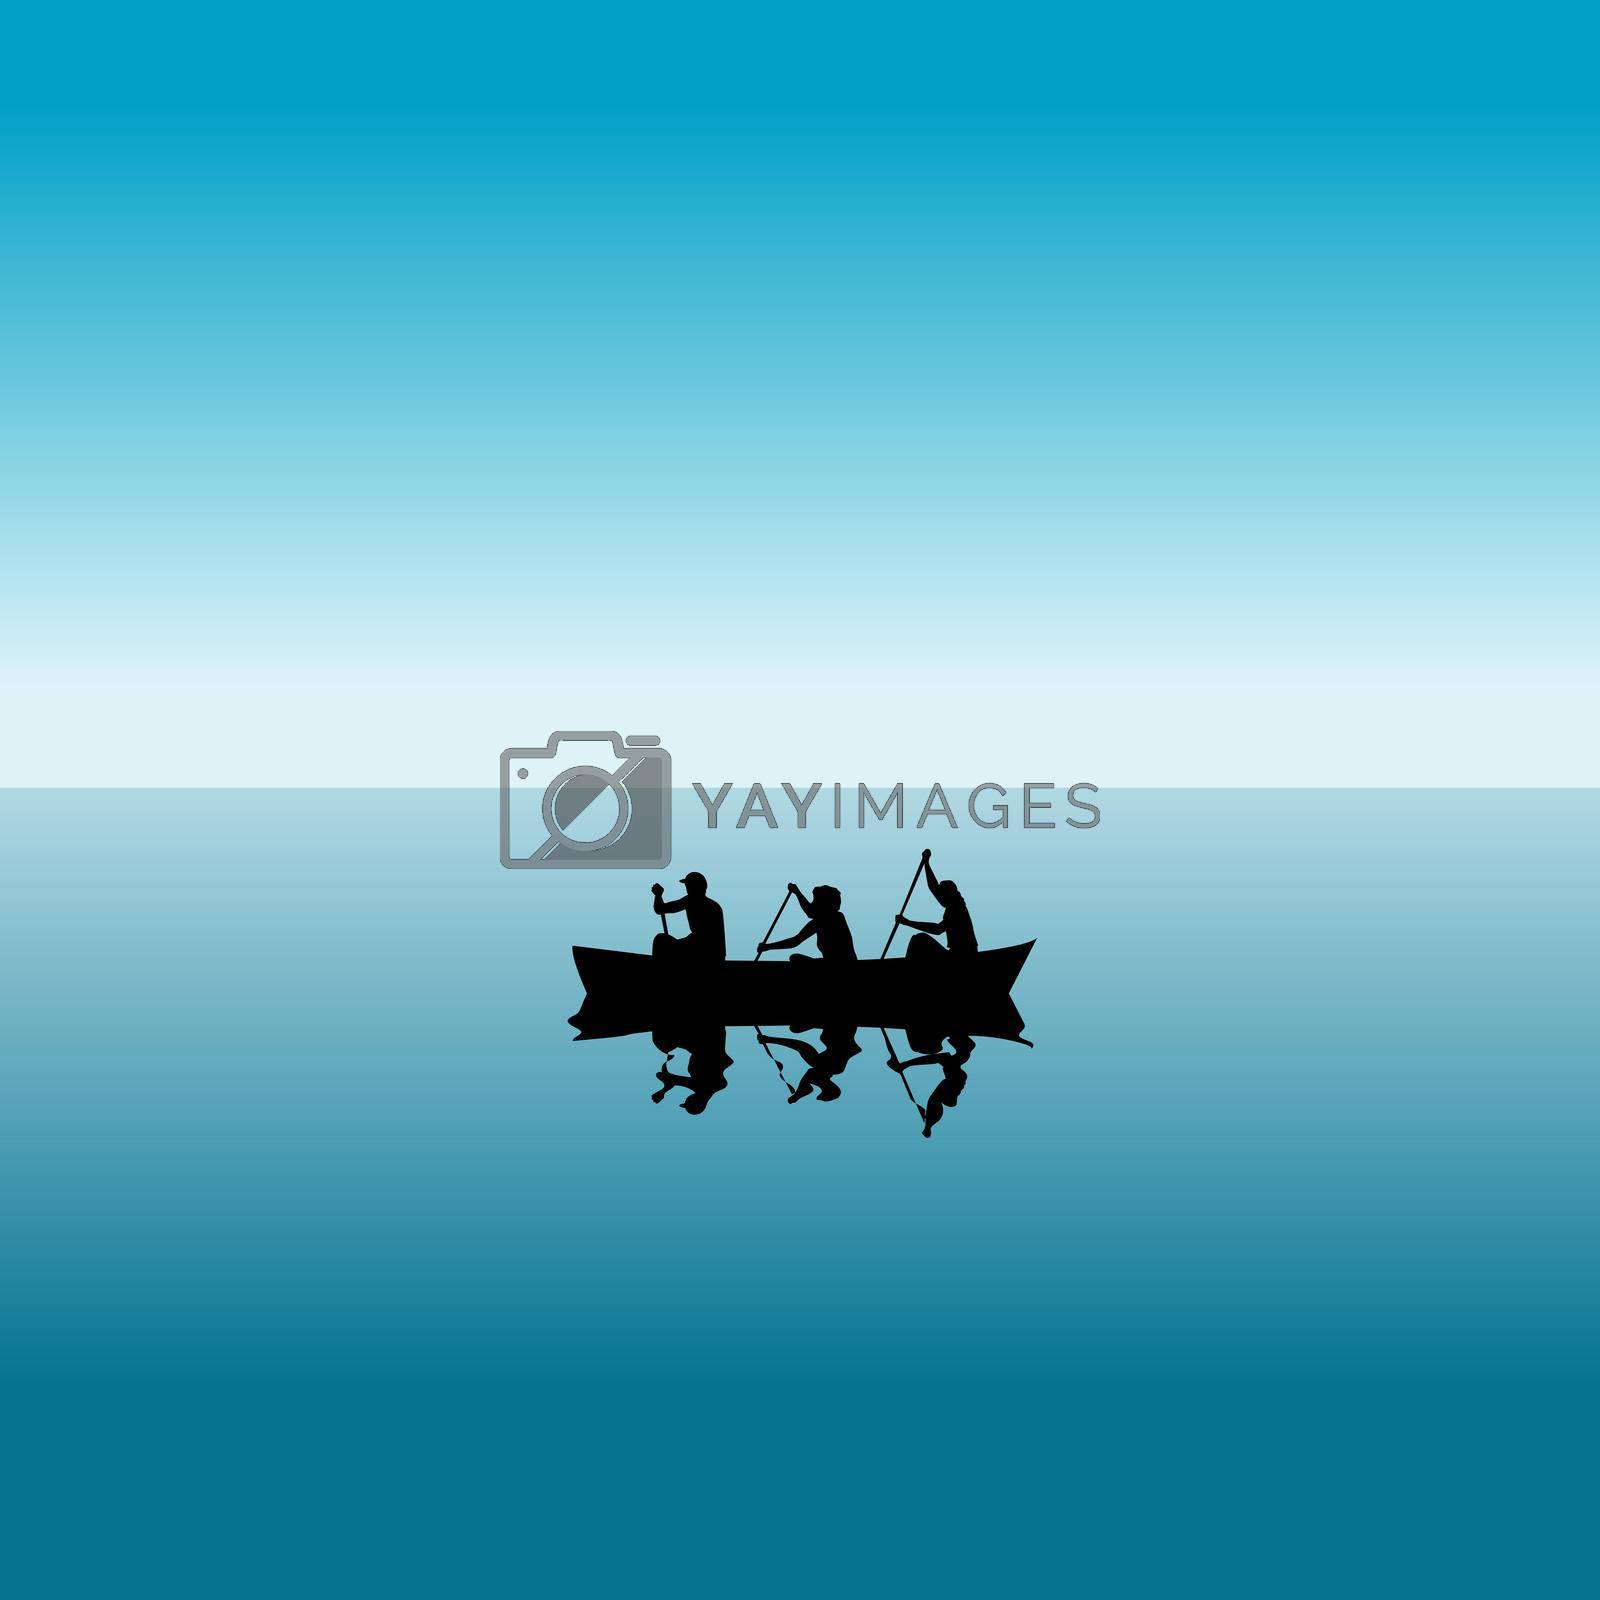 Three people in a boat silhouettes over blue water